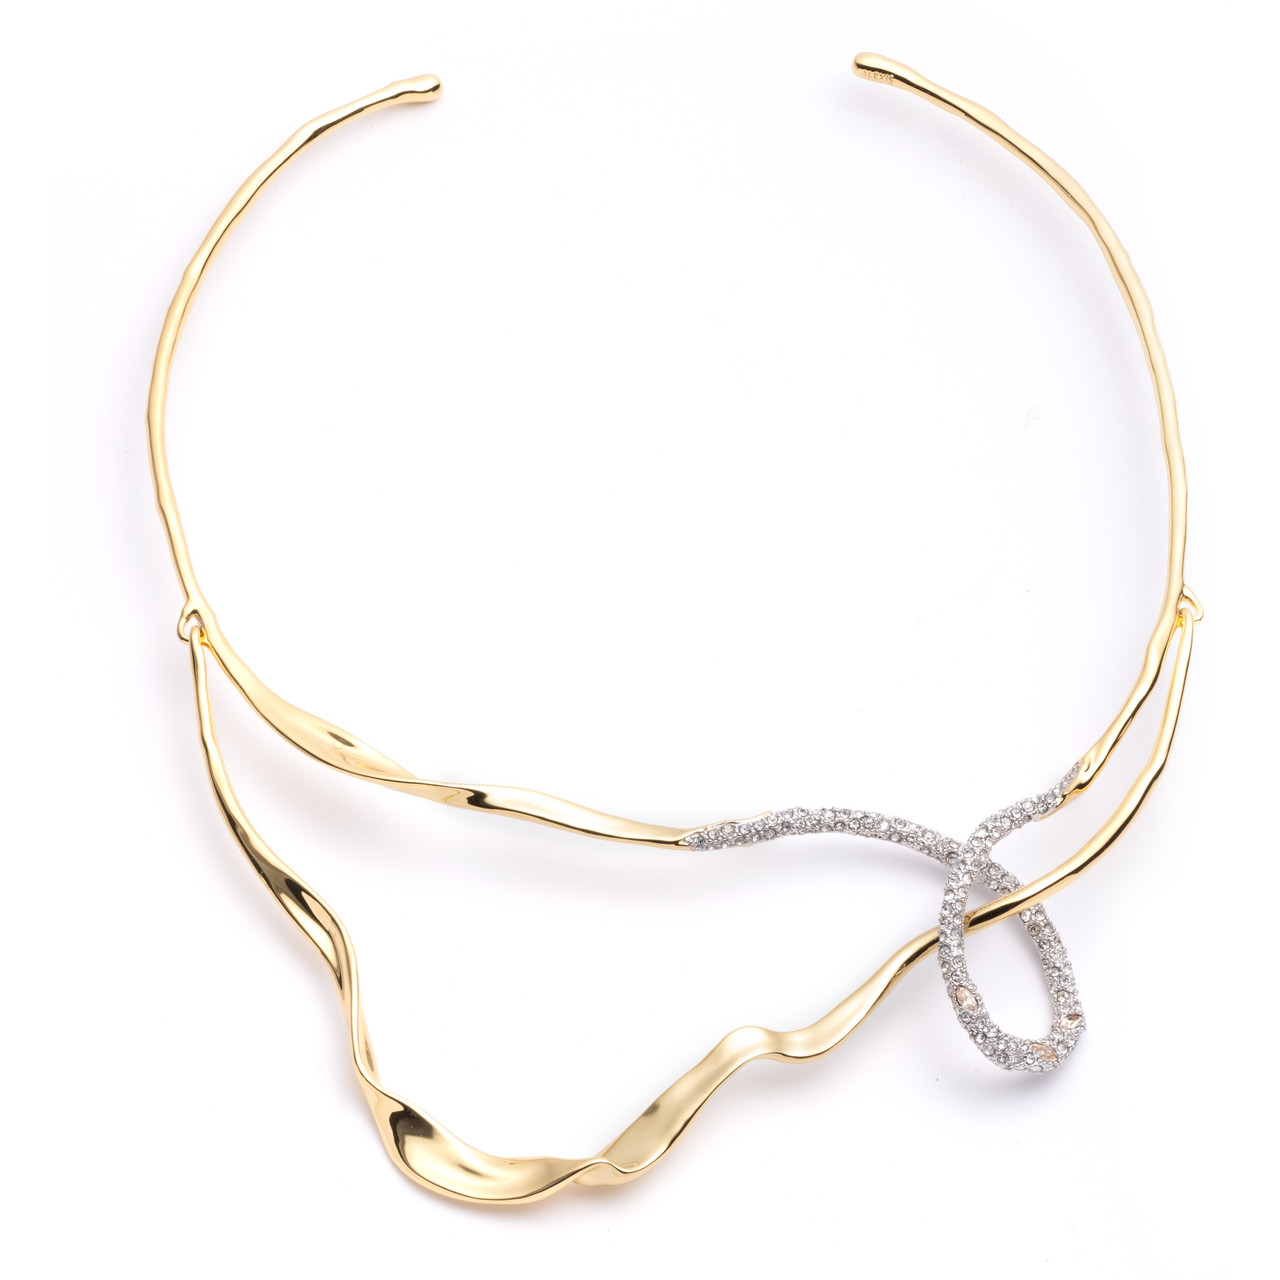 Solanales Crystal Looped Collar Necklace - Tomfoolery London